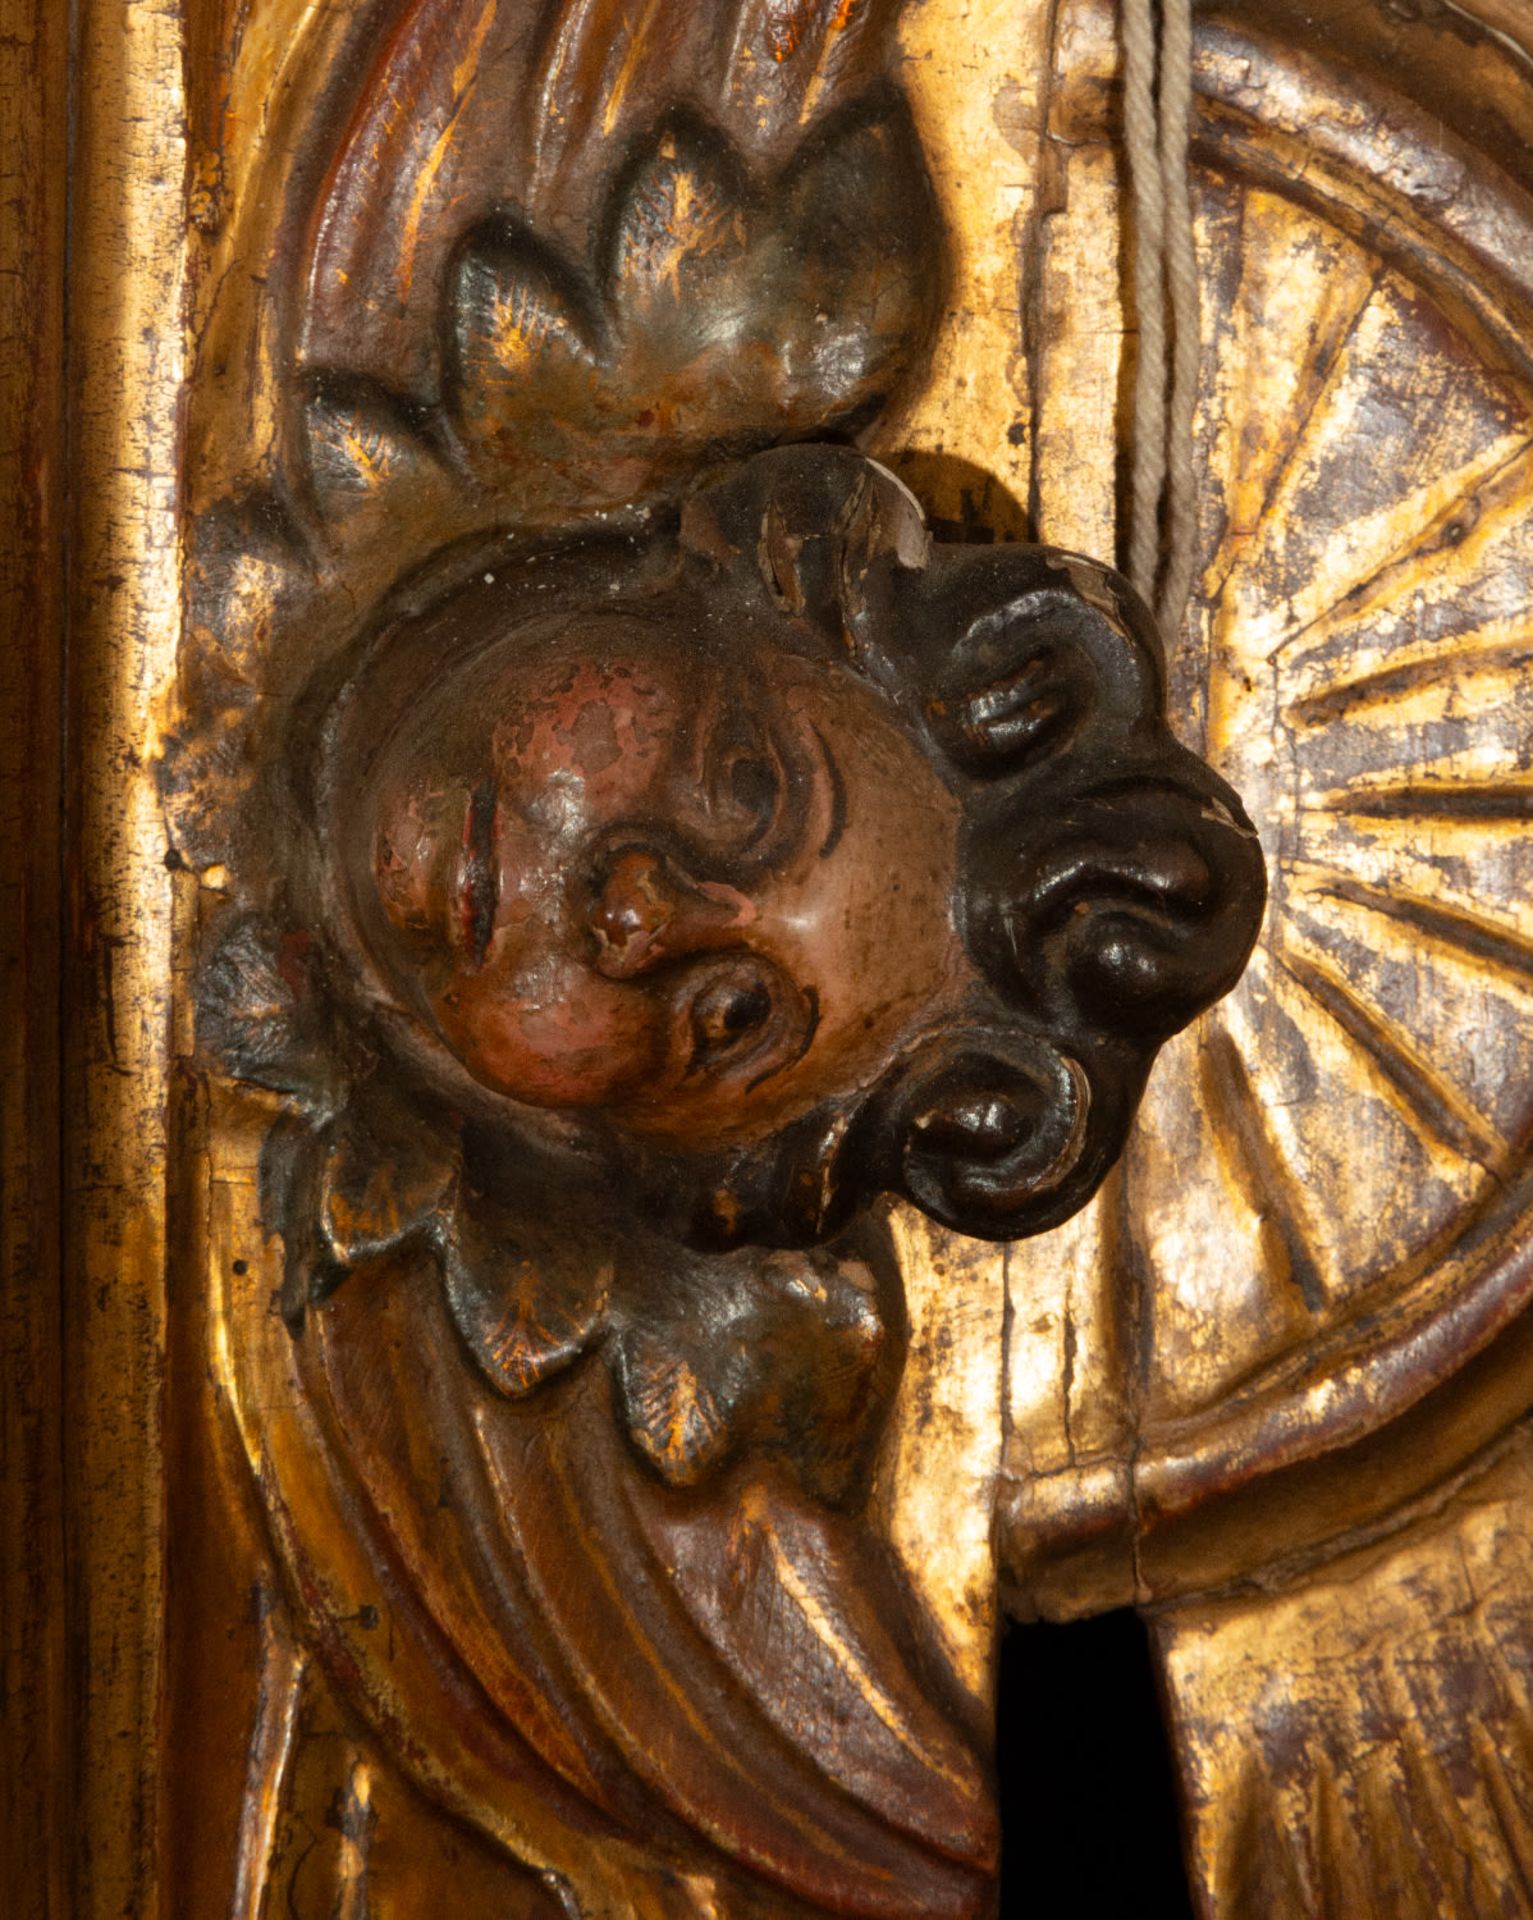 Cornucopia frame from the 17th century in polychrome and gilded wood relief with gold leaf - Image 5 of 8